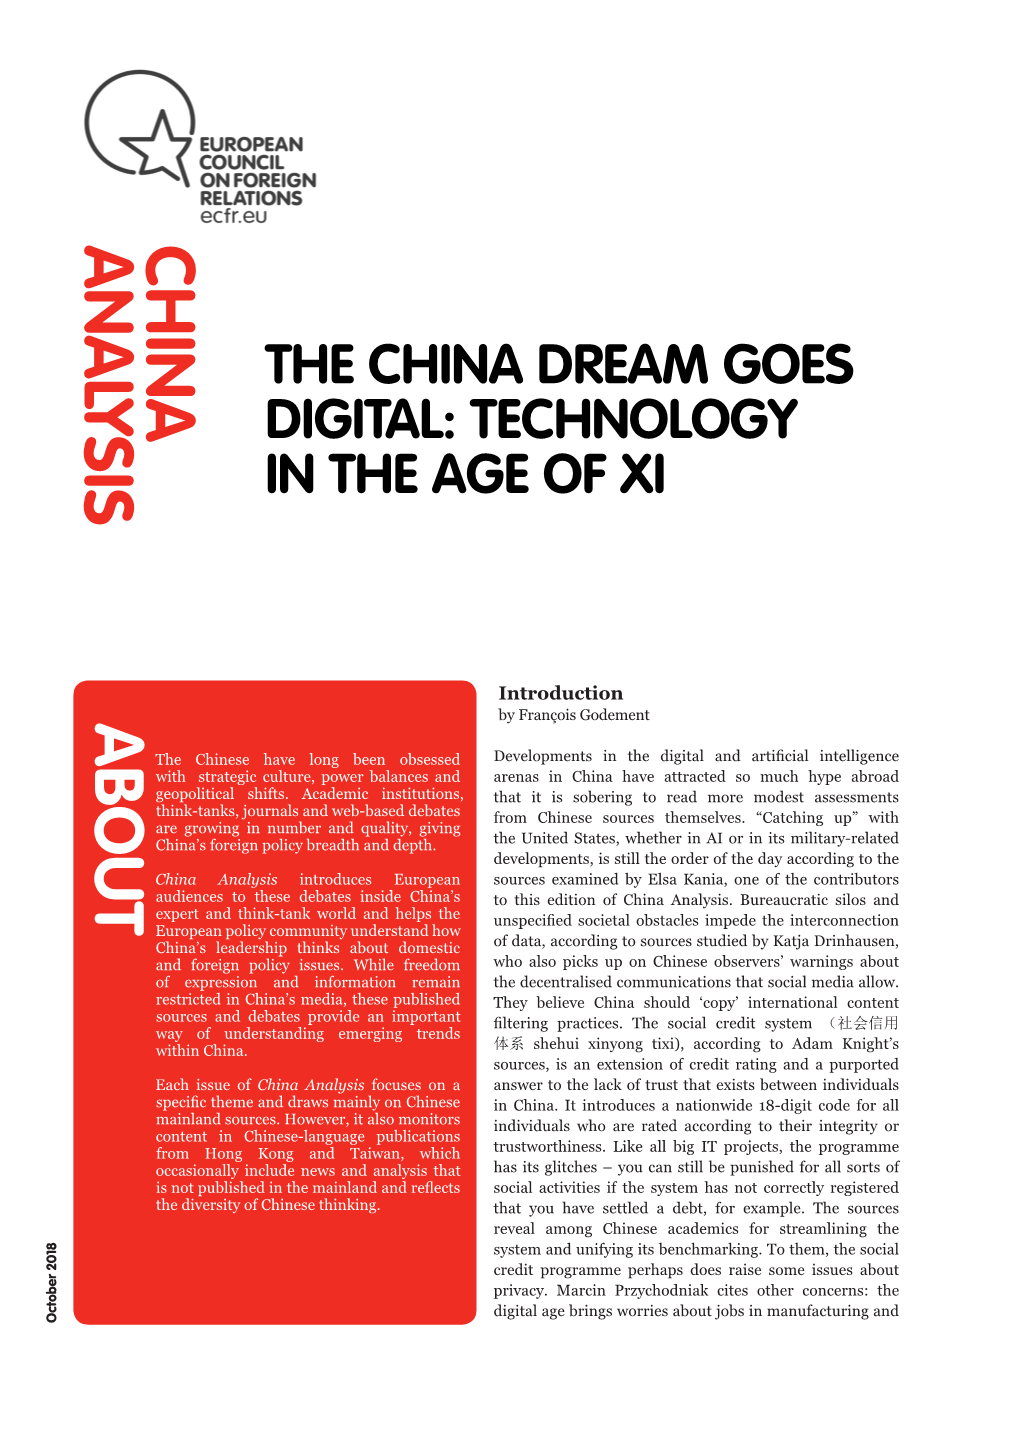 THE CHINA DREAM GOES DIGITAL: TECHNOLOGY in the AGE of XI Rather Than the Dangers of Overwhelming Control